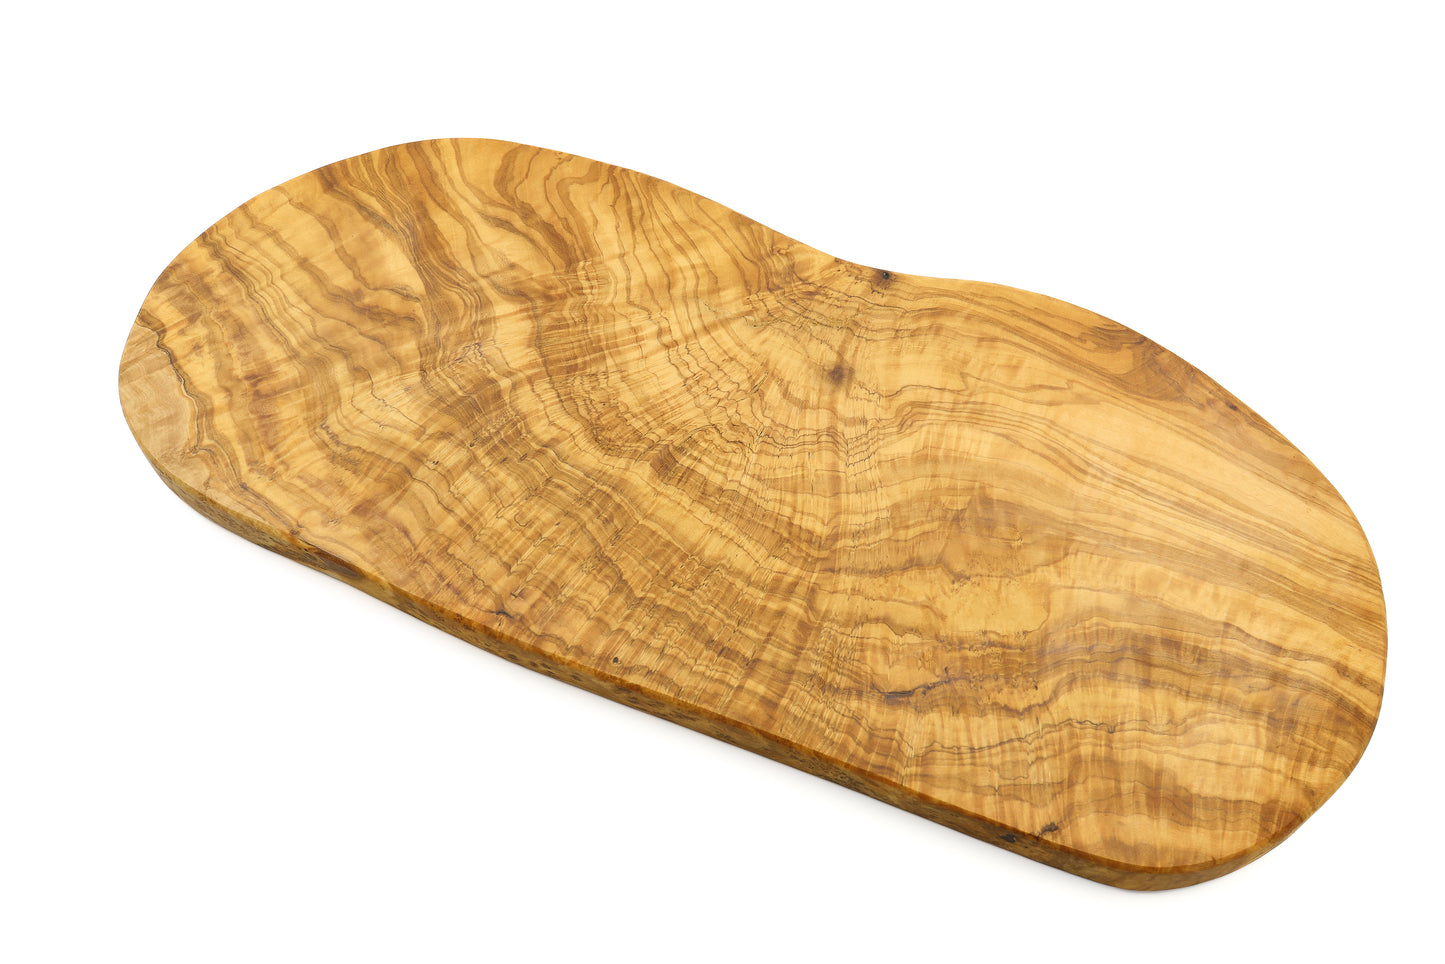 Irregular Olive Wood Cutting Board with a Naturally Rustic Shape